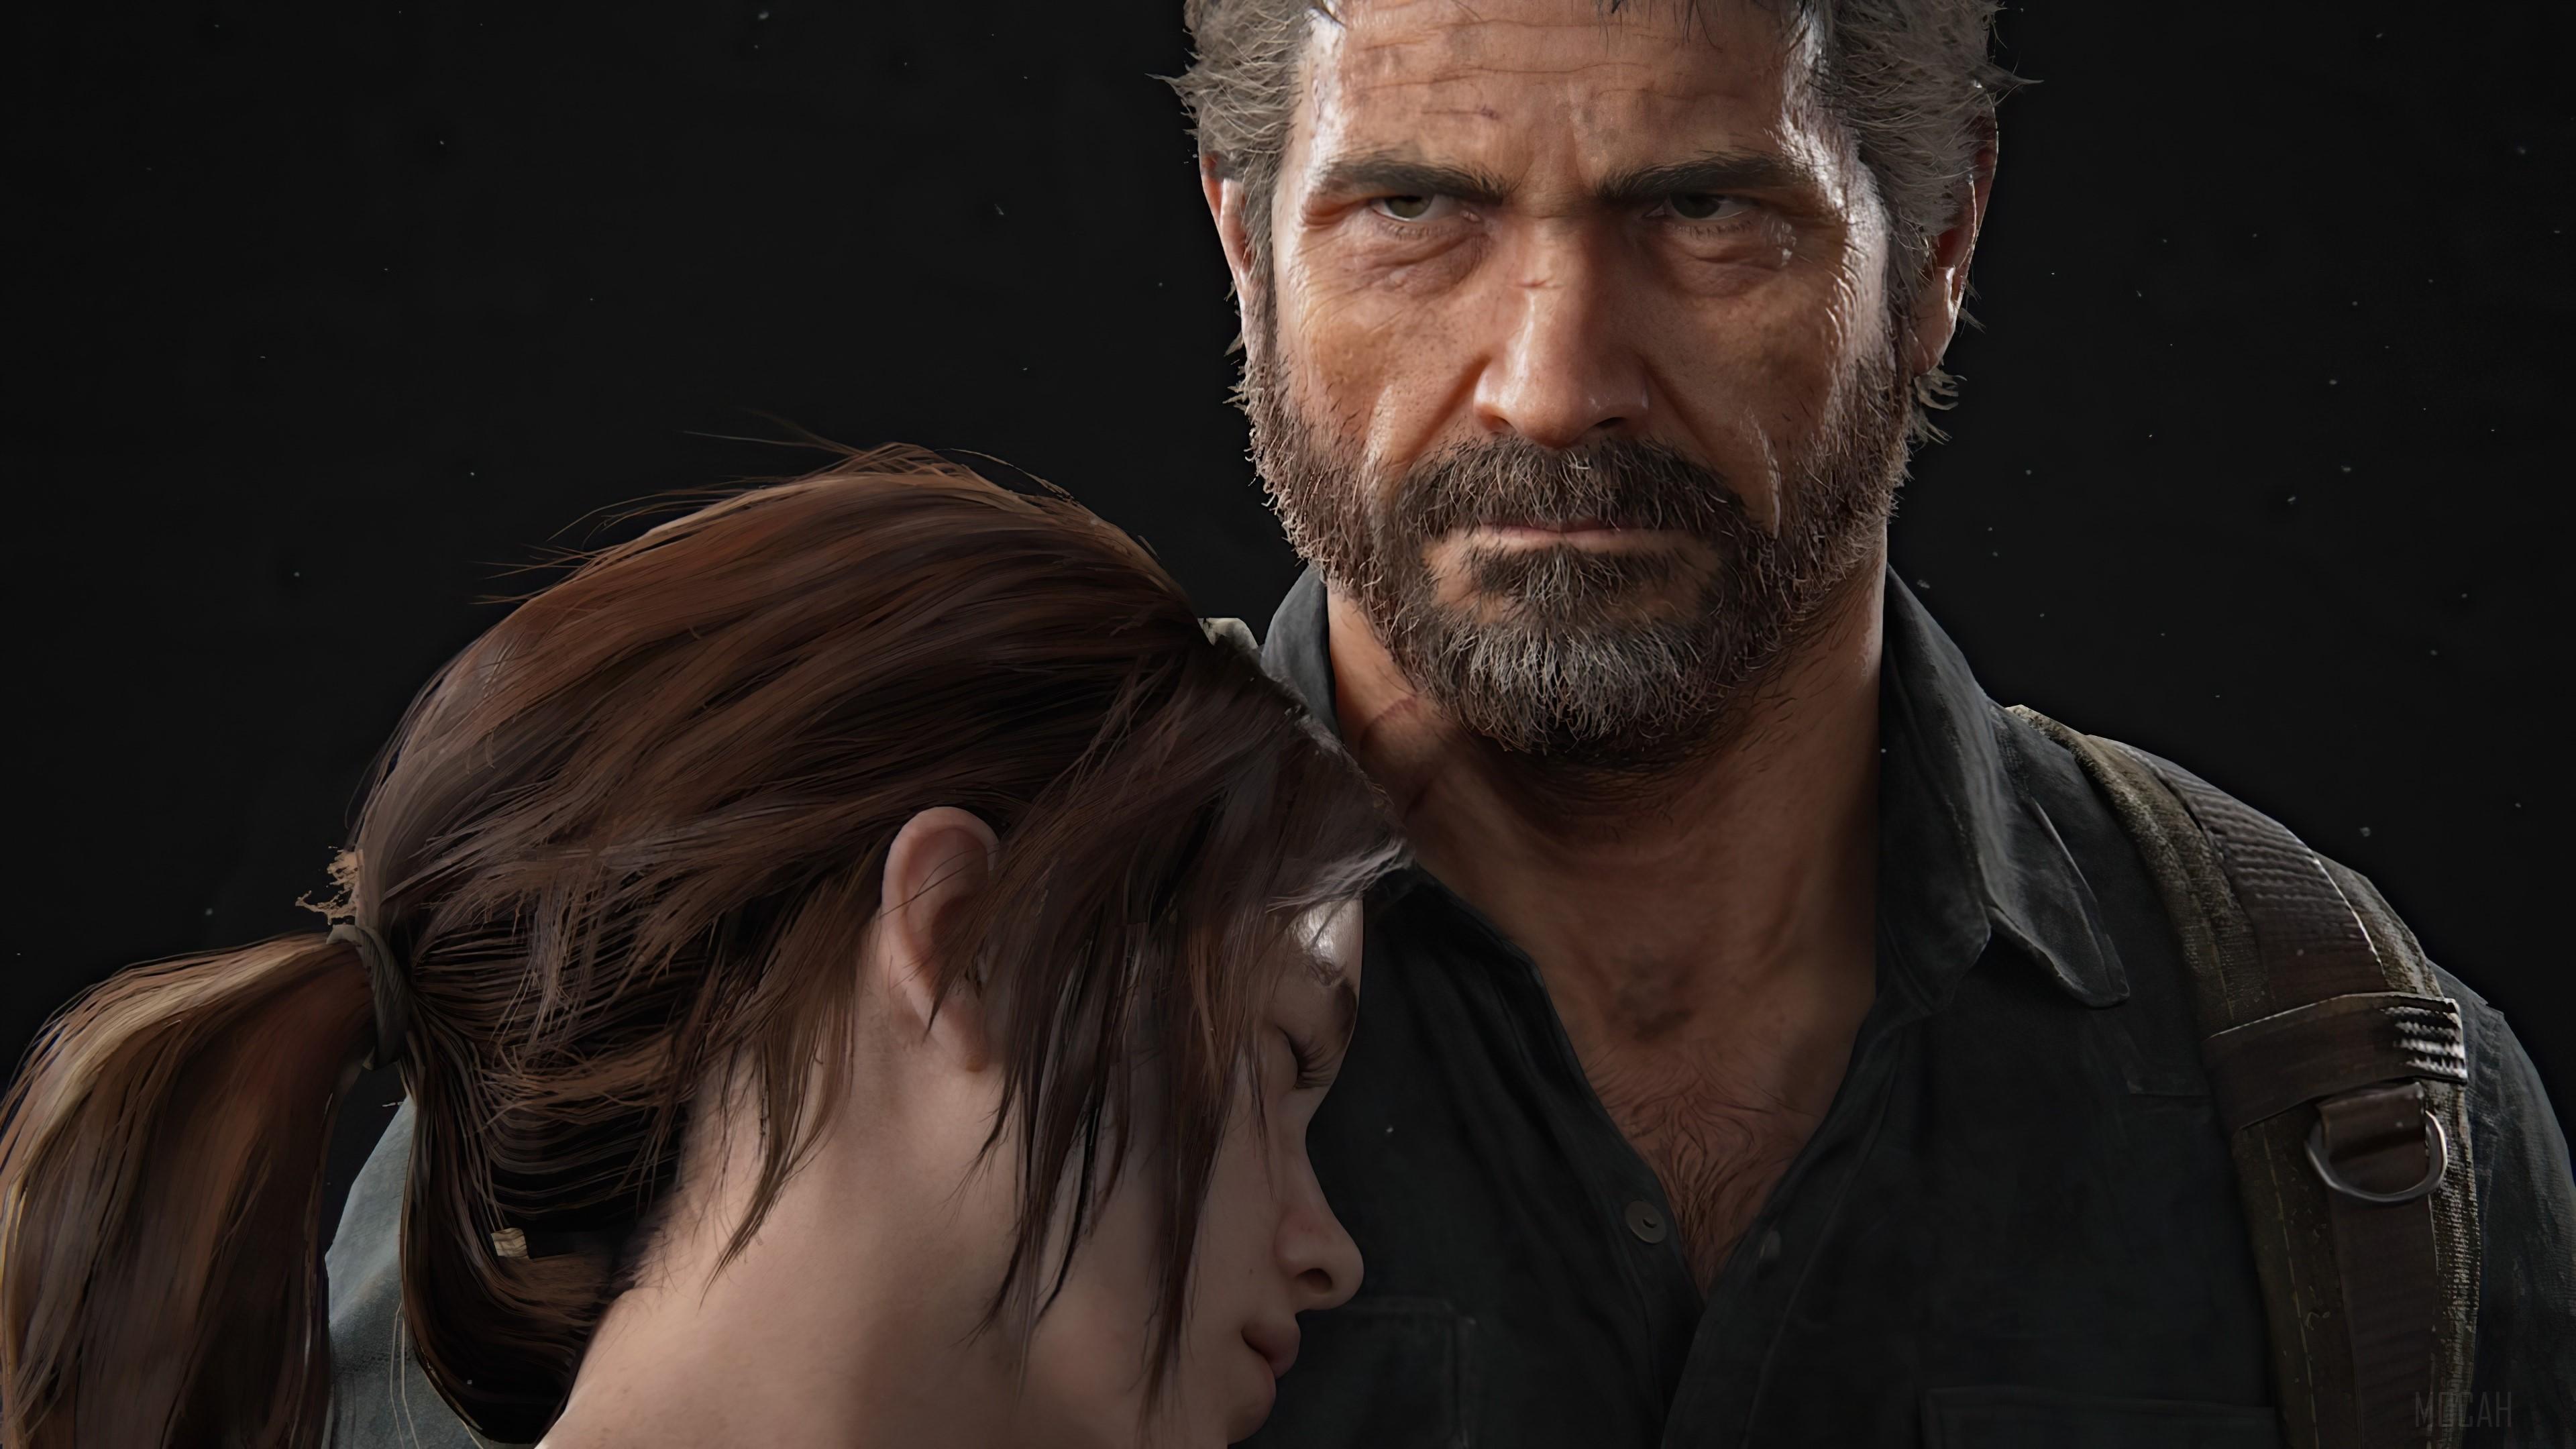 Joel The Last Of US Wallpaper,HD Games Wallpapers,4k Wallpapers,Images, Backgrounds,Photos and Pictures